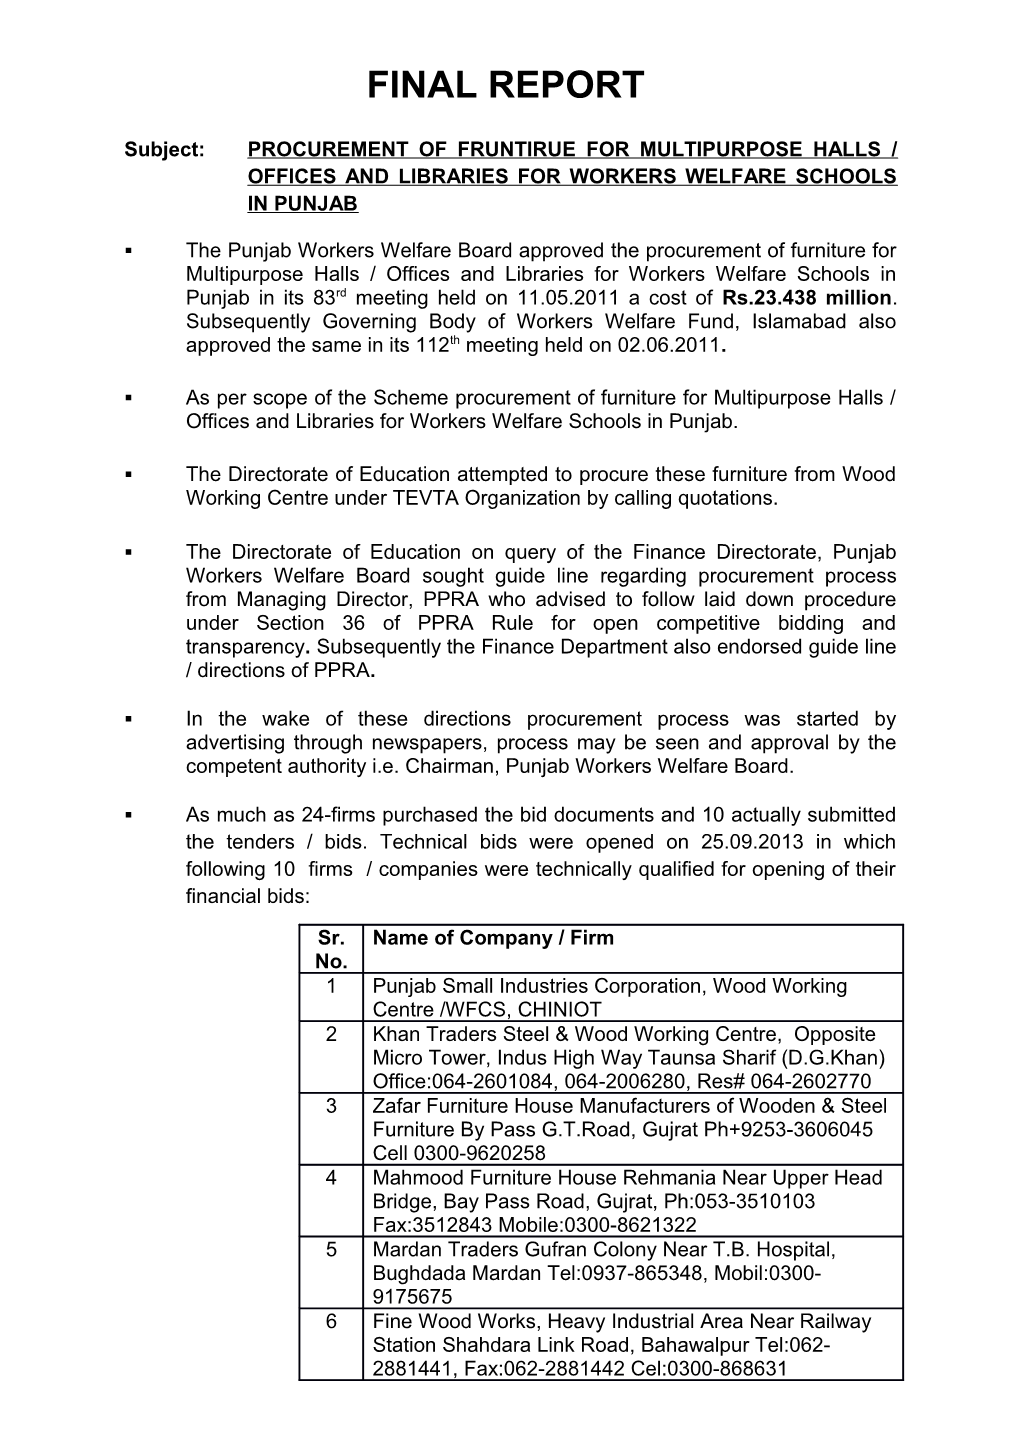 Subject: PROCUREMENT of FRUNTIRUE for MULTIPURPOSE HALLS / OFFICES and LIBRARIES for WORKERS